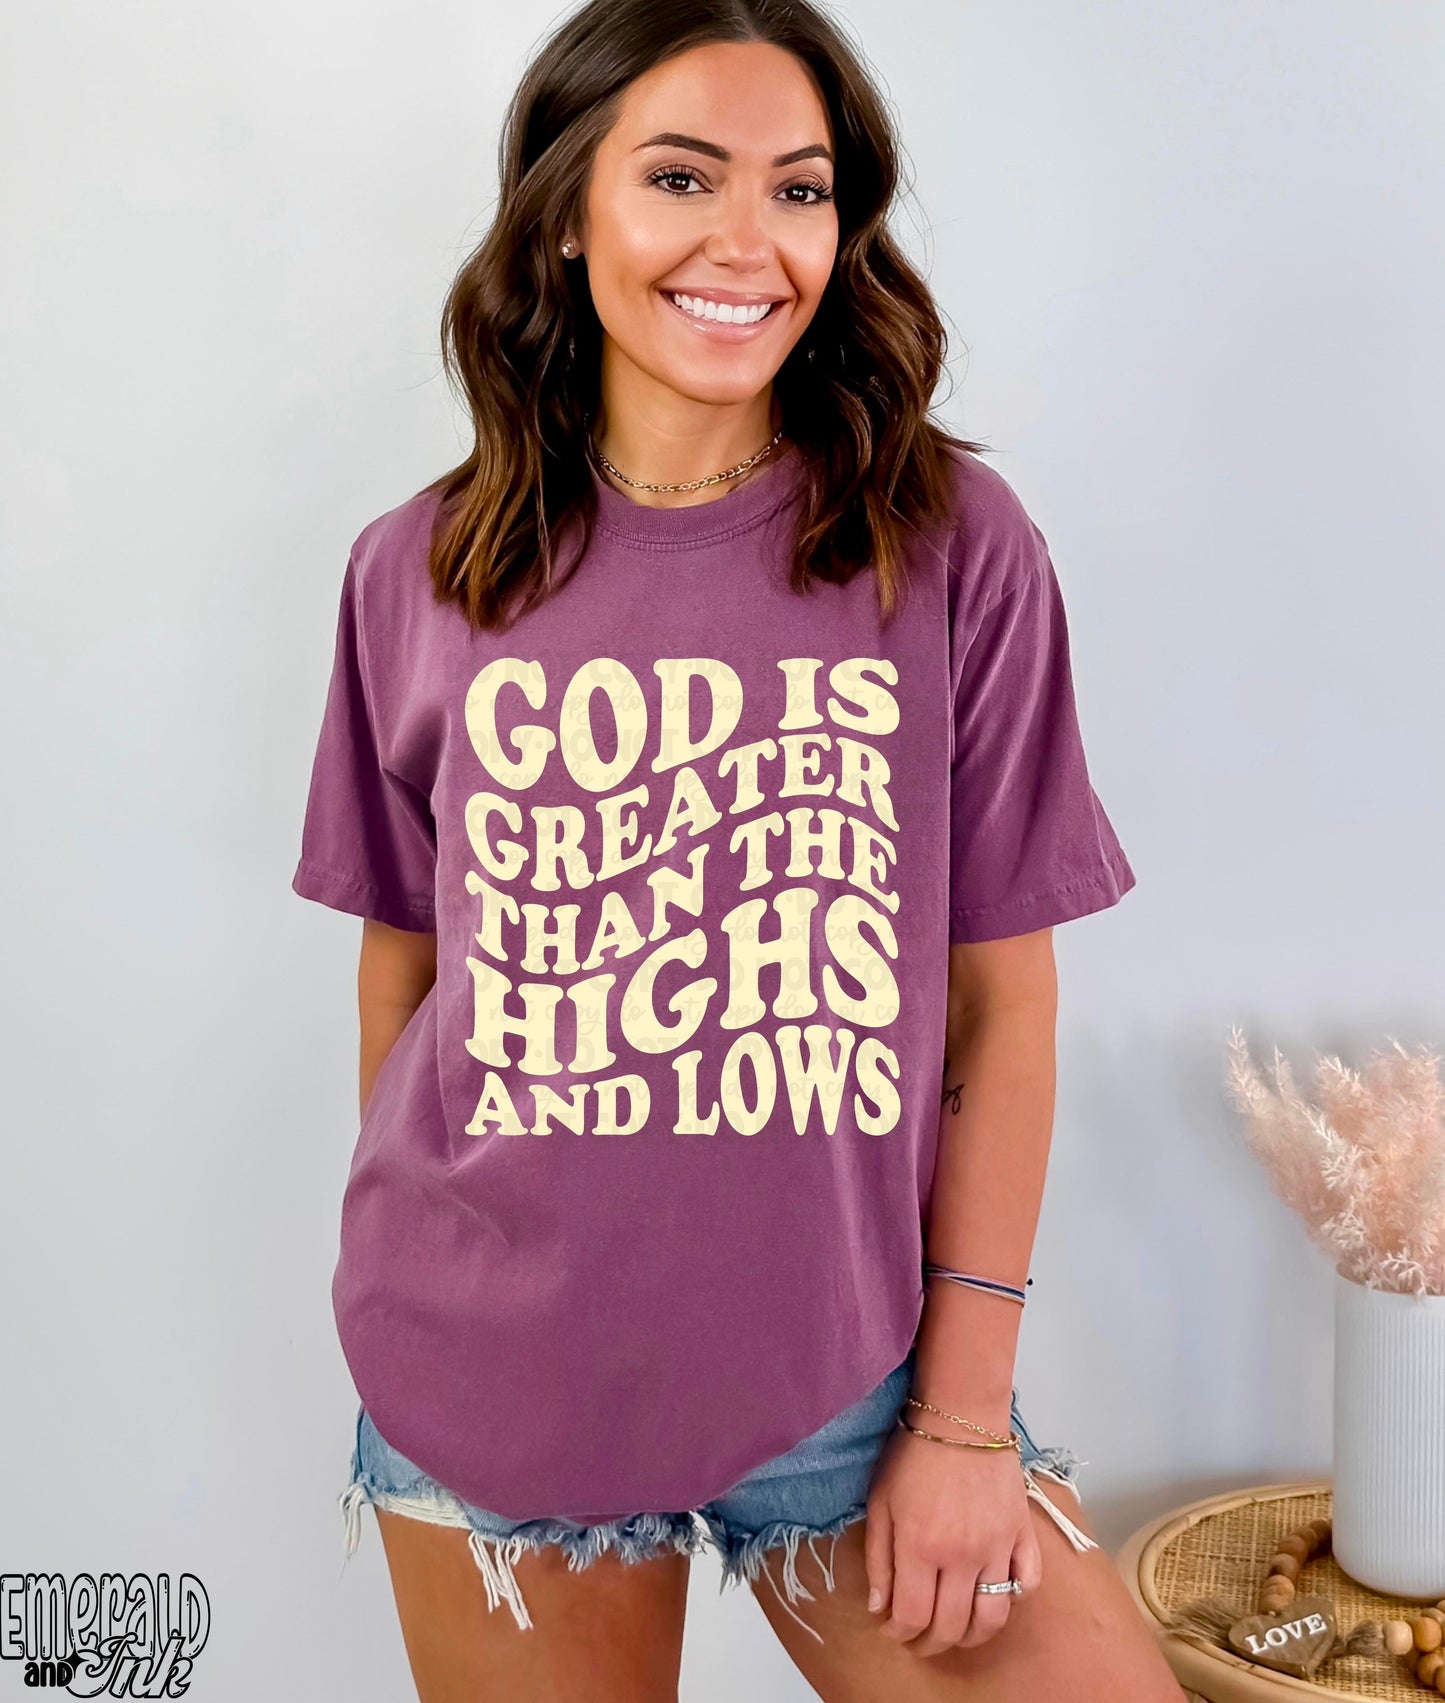 God is greater than the highs and lows (full size) - screen print transfer